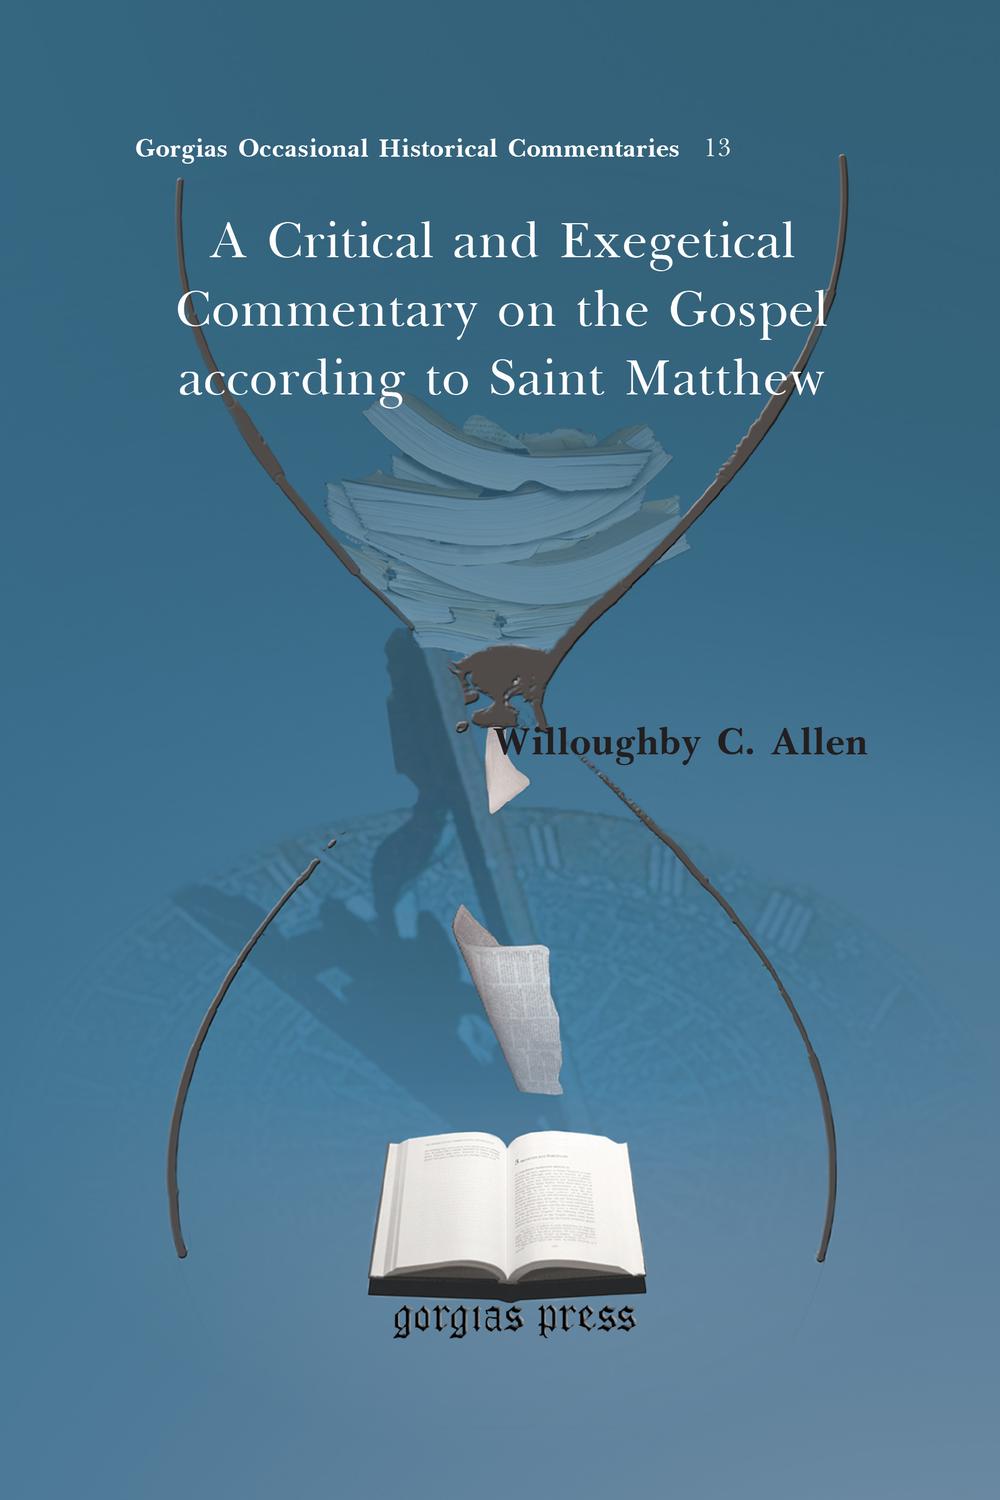 A Critical and Exegetical Commentary on the Gospel according to Saint Matthew - Willoughby C. Allen,,